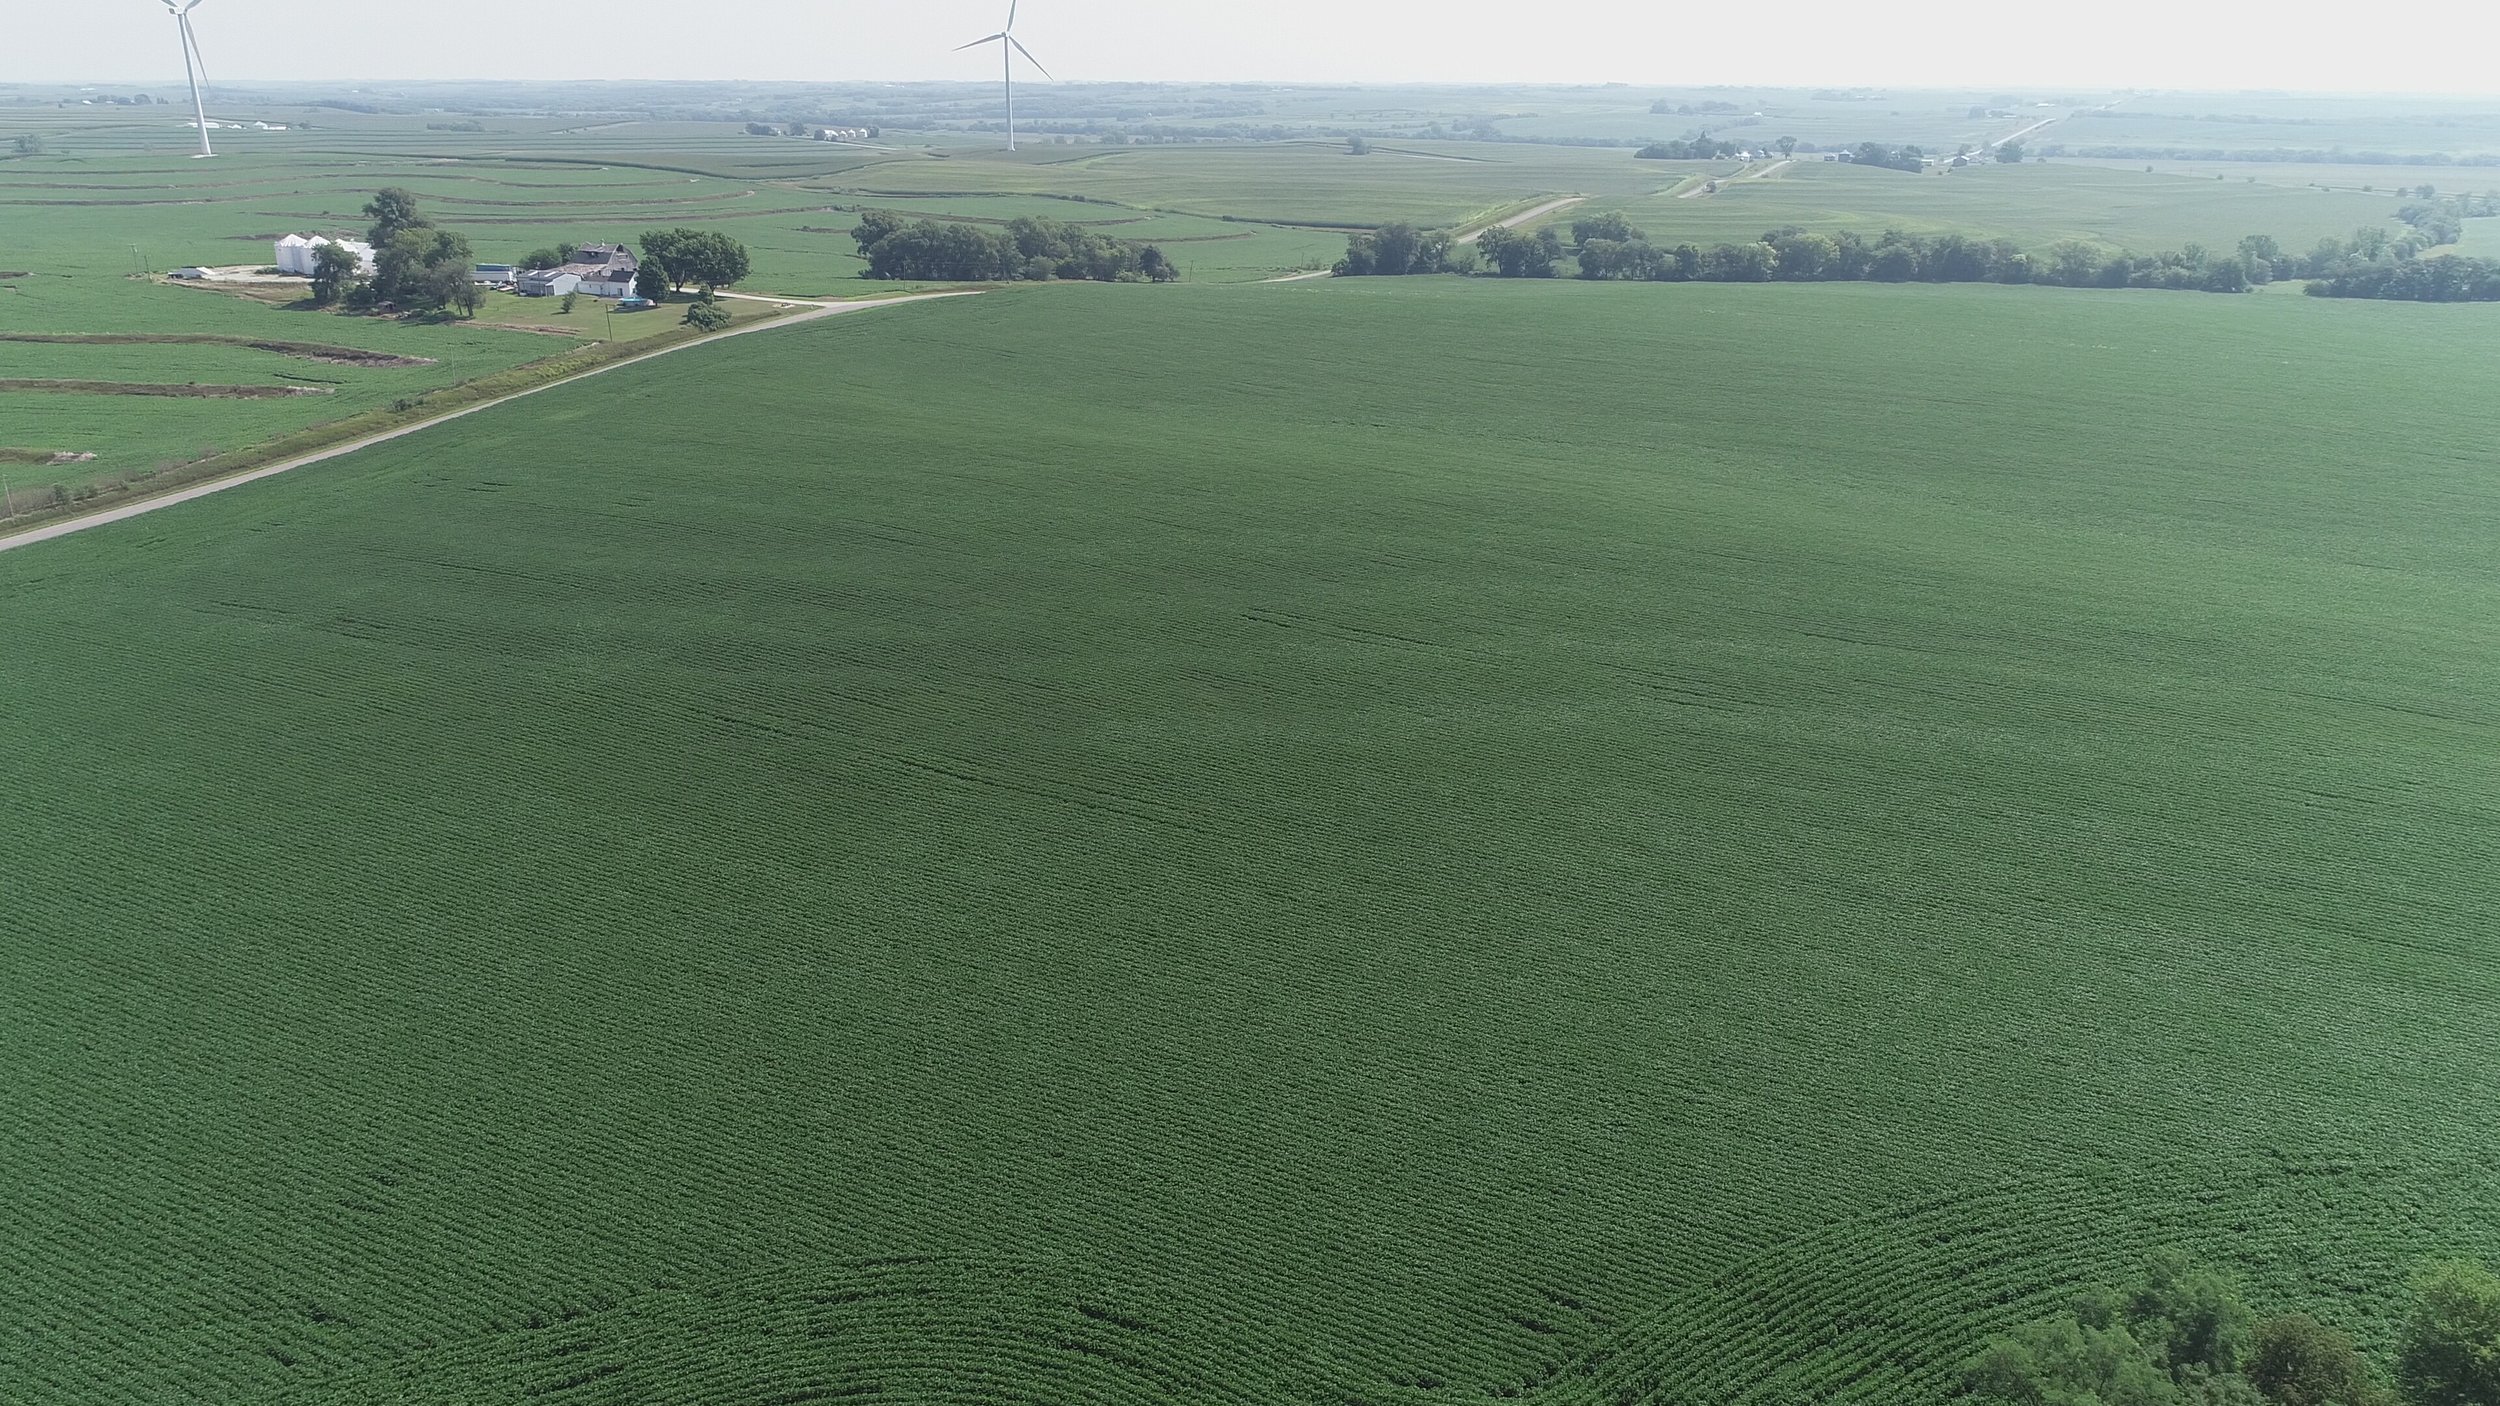 View of North Tract Planted in Soybeans (July 22, 2018)